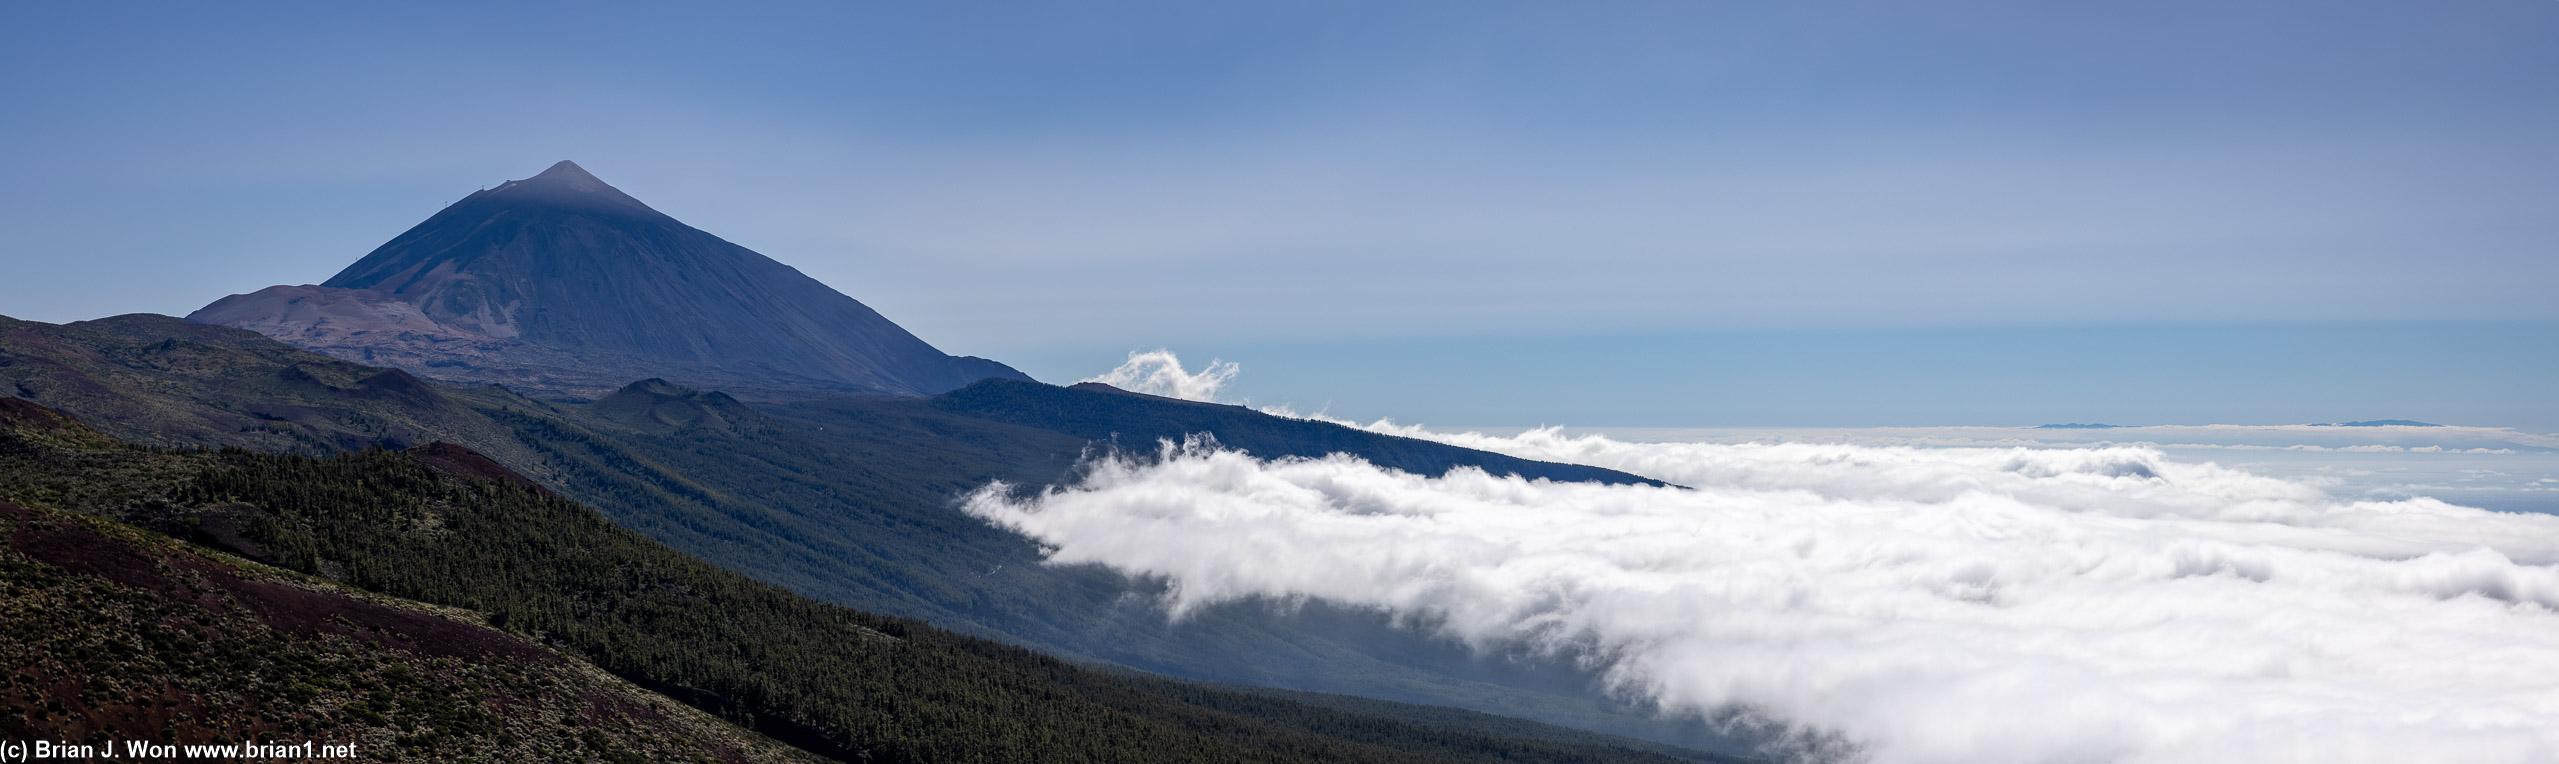 Yet another view of El Tiede above the clouds.